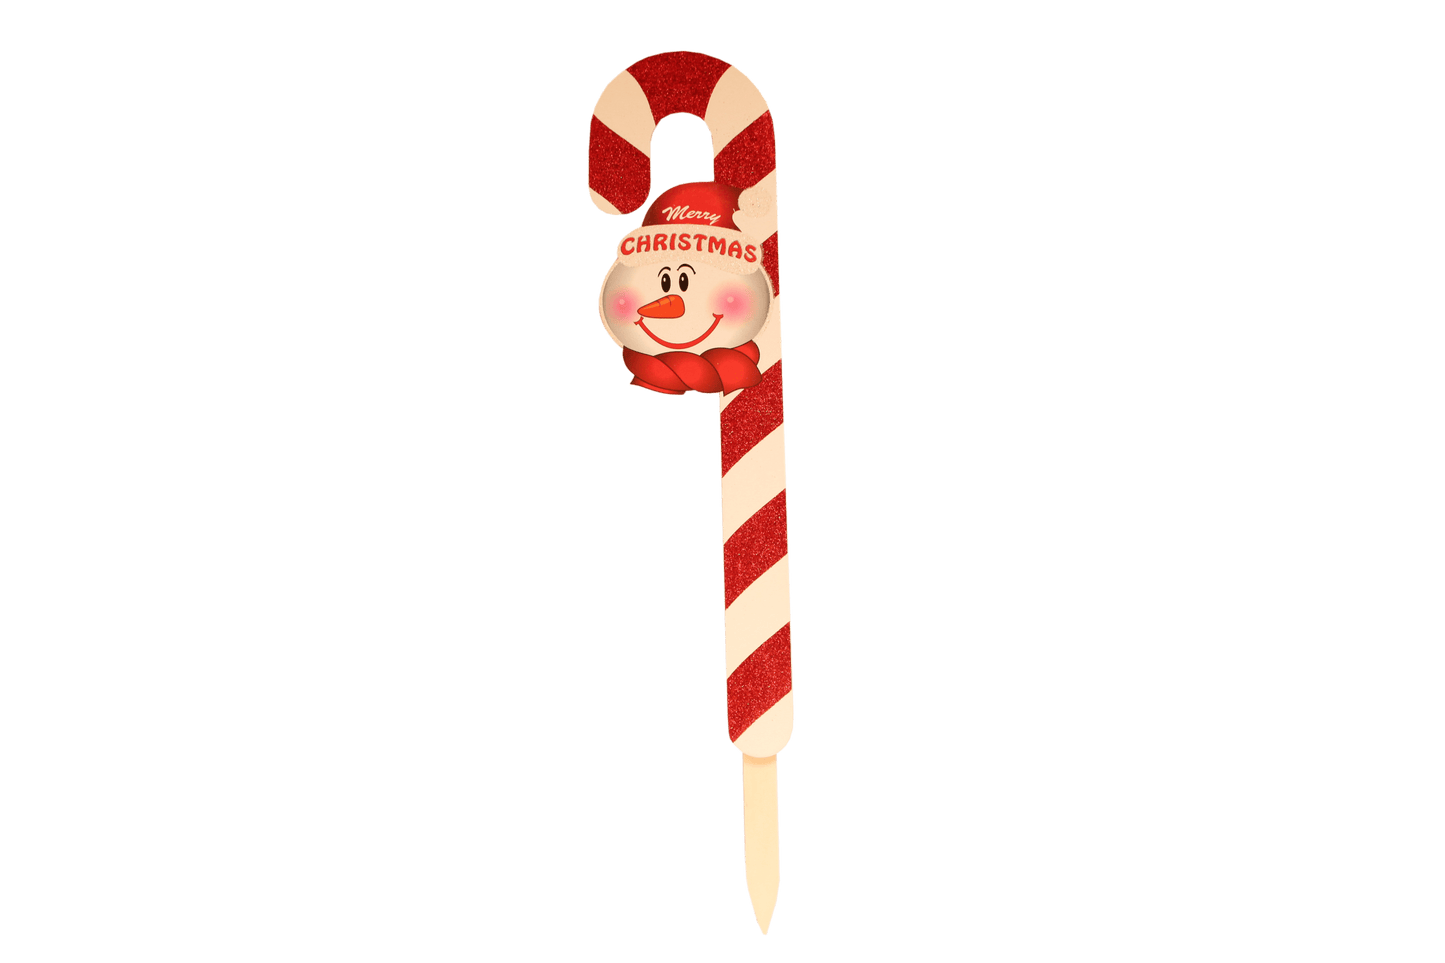 Merry Christmas Snowman Candy Cane Pick (1 piece)